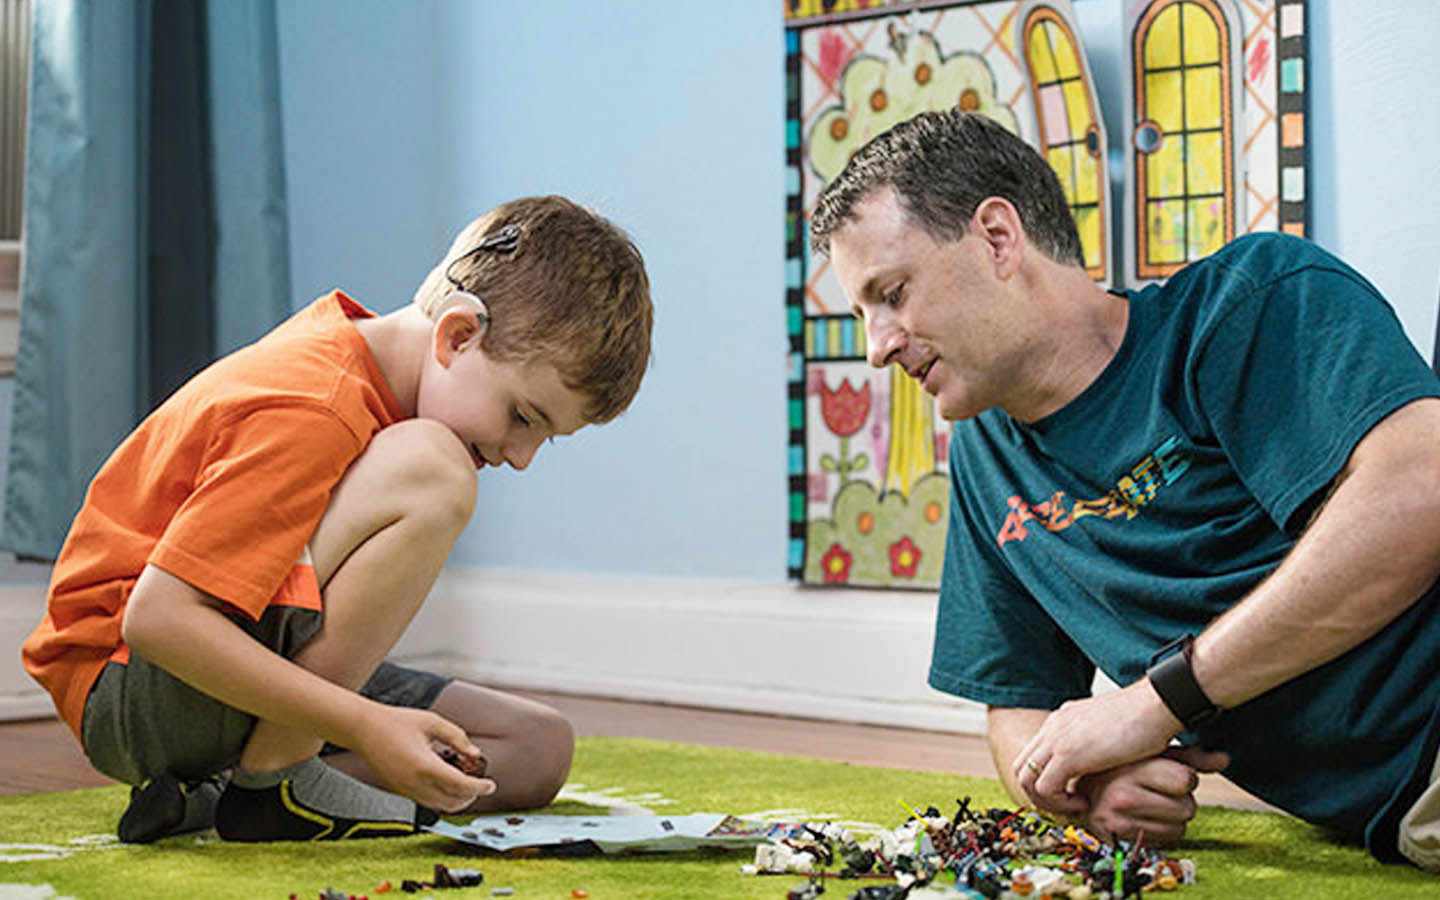 A boy with a Cochlear implant plays on the floor together wiht his dad